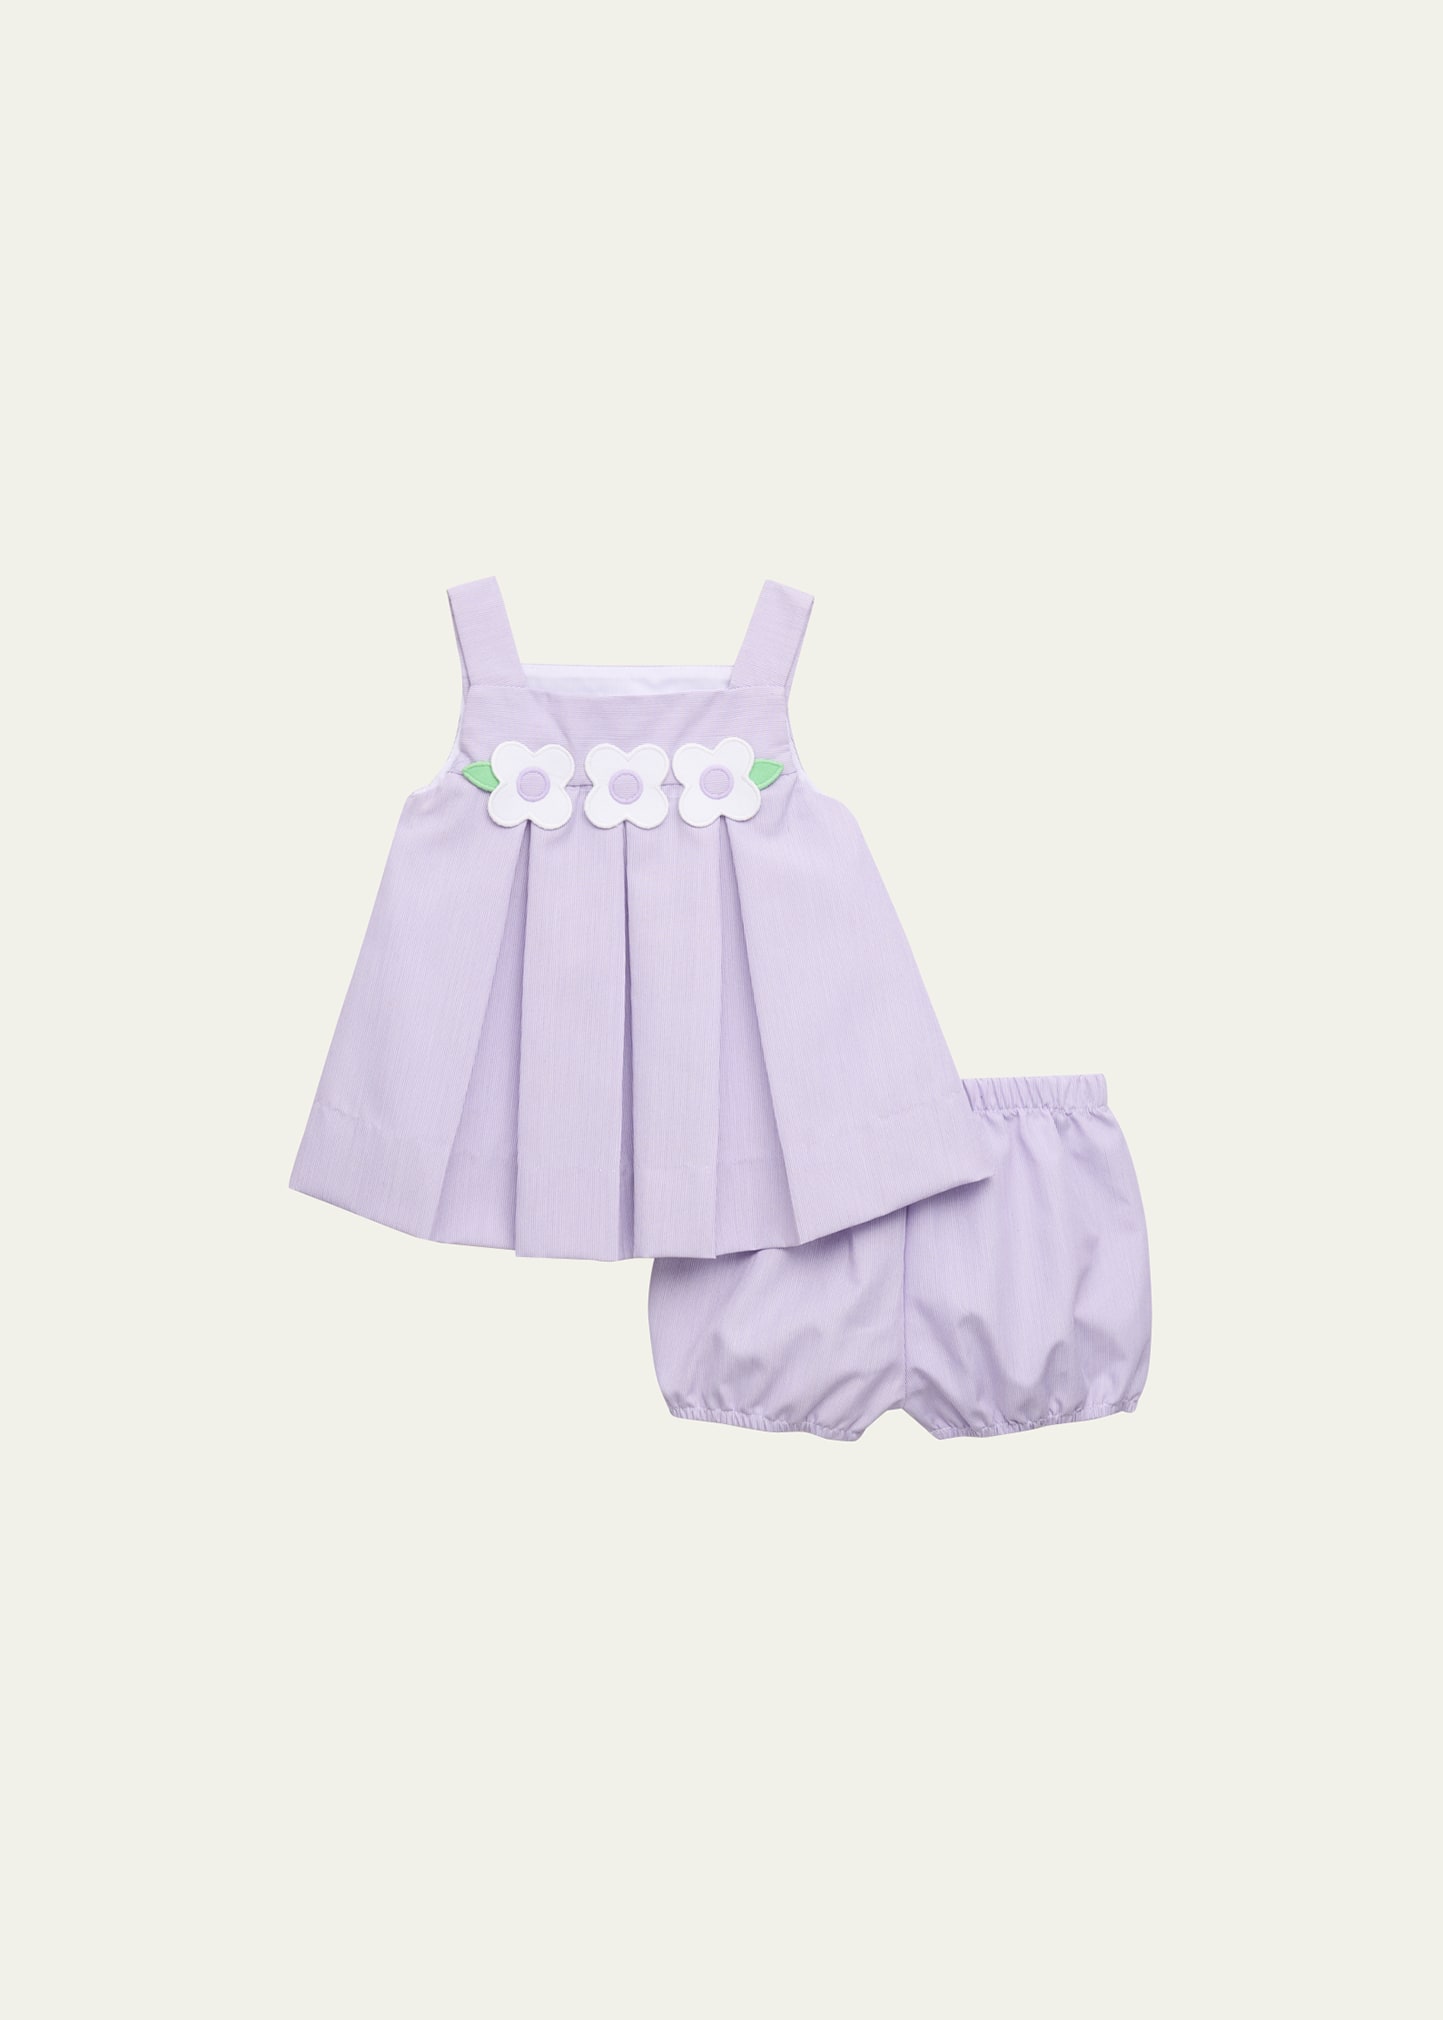 Florence Eiseman Kids' Girl's Pincord Flower Dress And Bloomers In Lavender